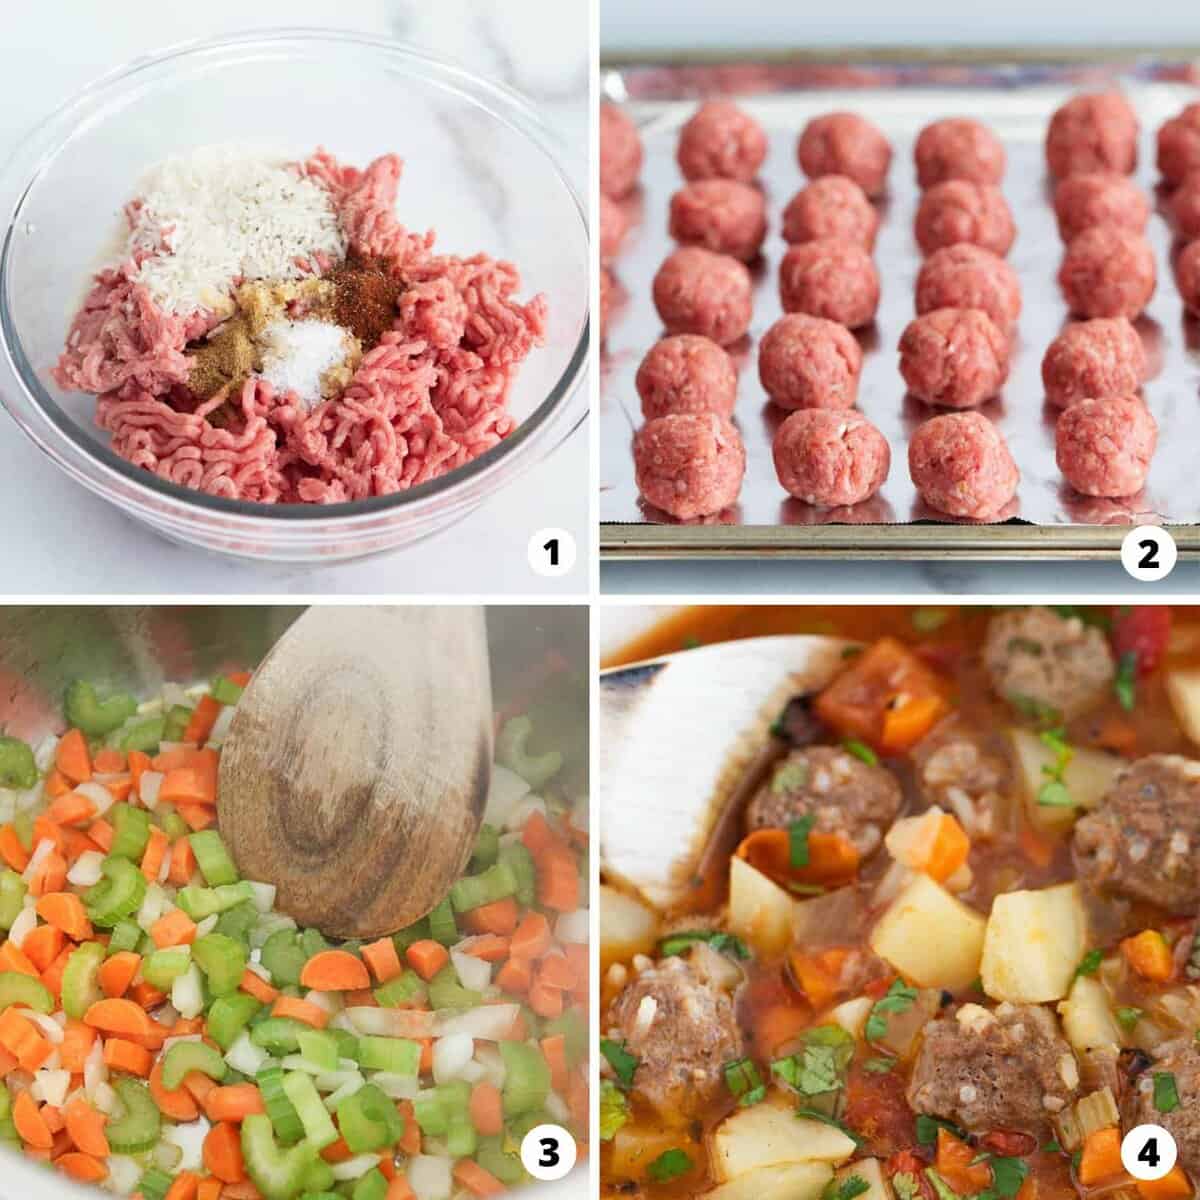 Showing how to make albondigas soup in a 4 step collage.